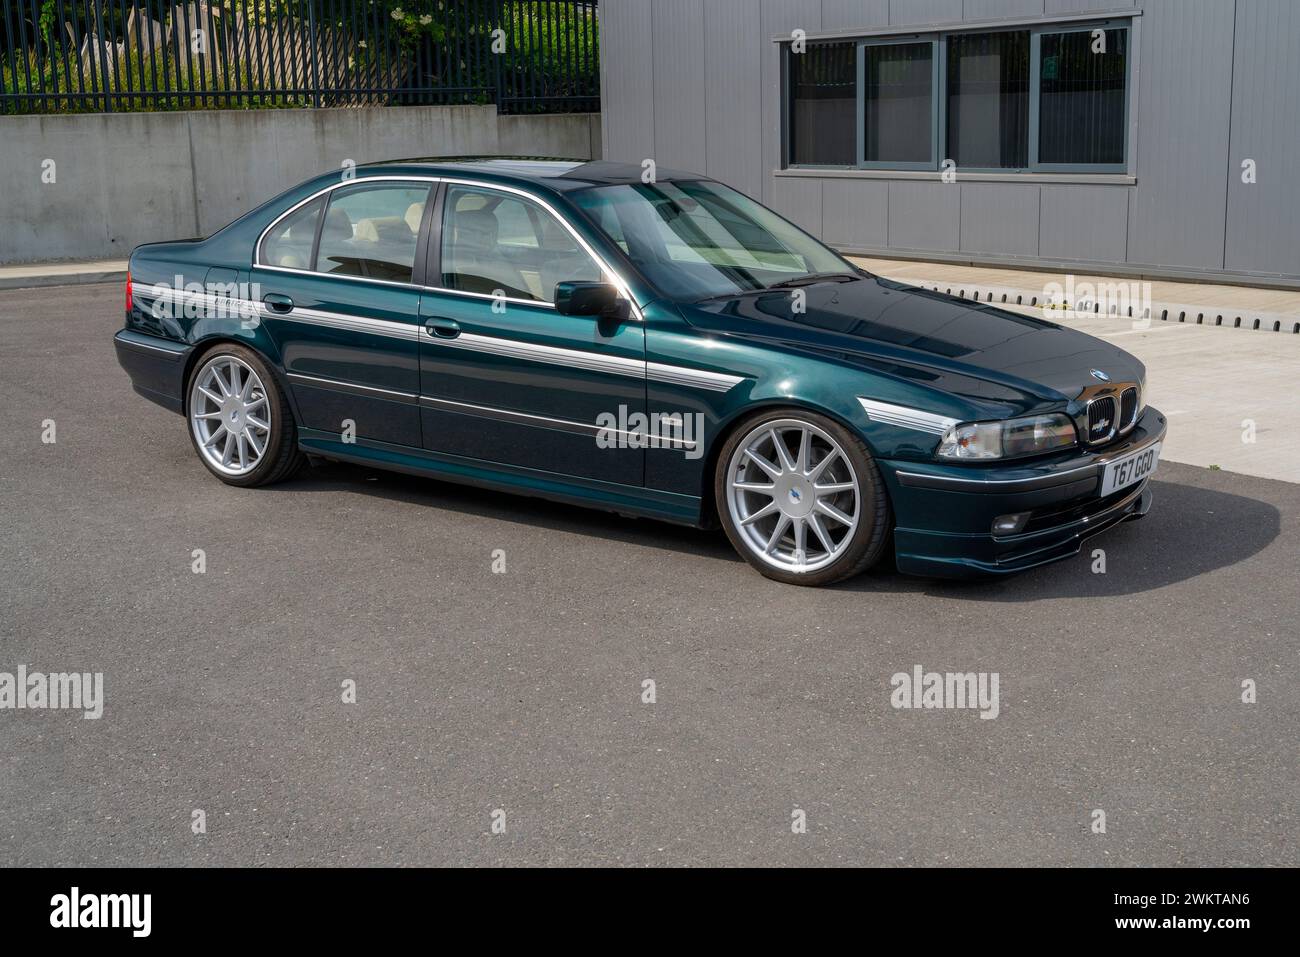 Rare 1999 Hartge E39 BMW 540i 5 Series luxury modern classic German saloon car with unique wheels, suspension and graphics Stock Photo